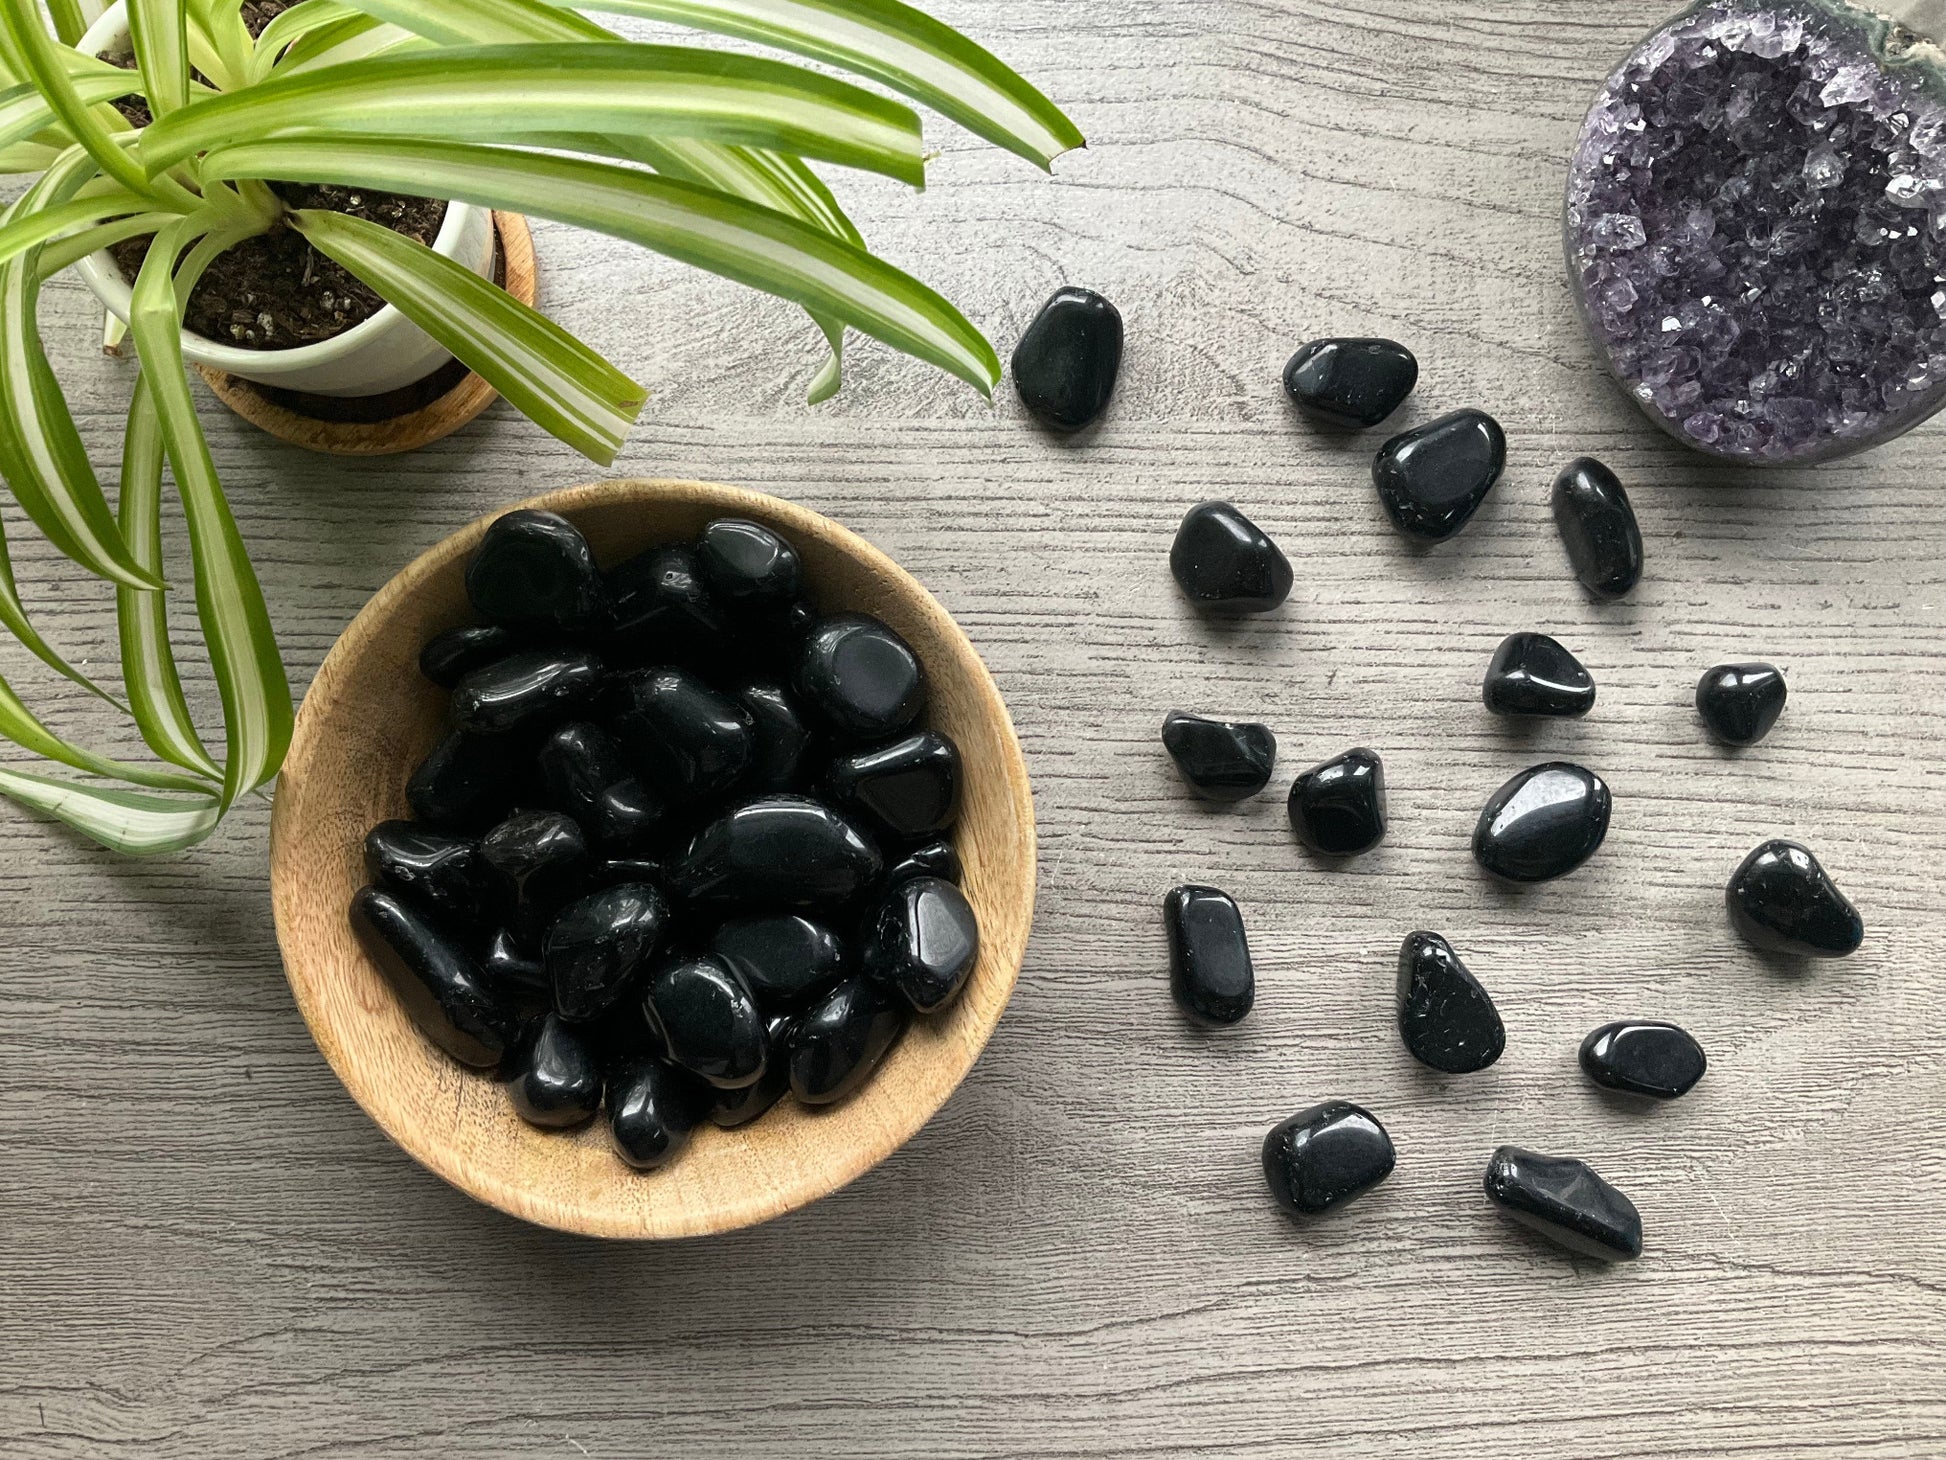 Pictured are various black obsidian tumbled stones.